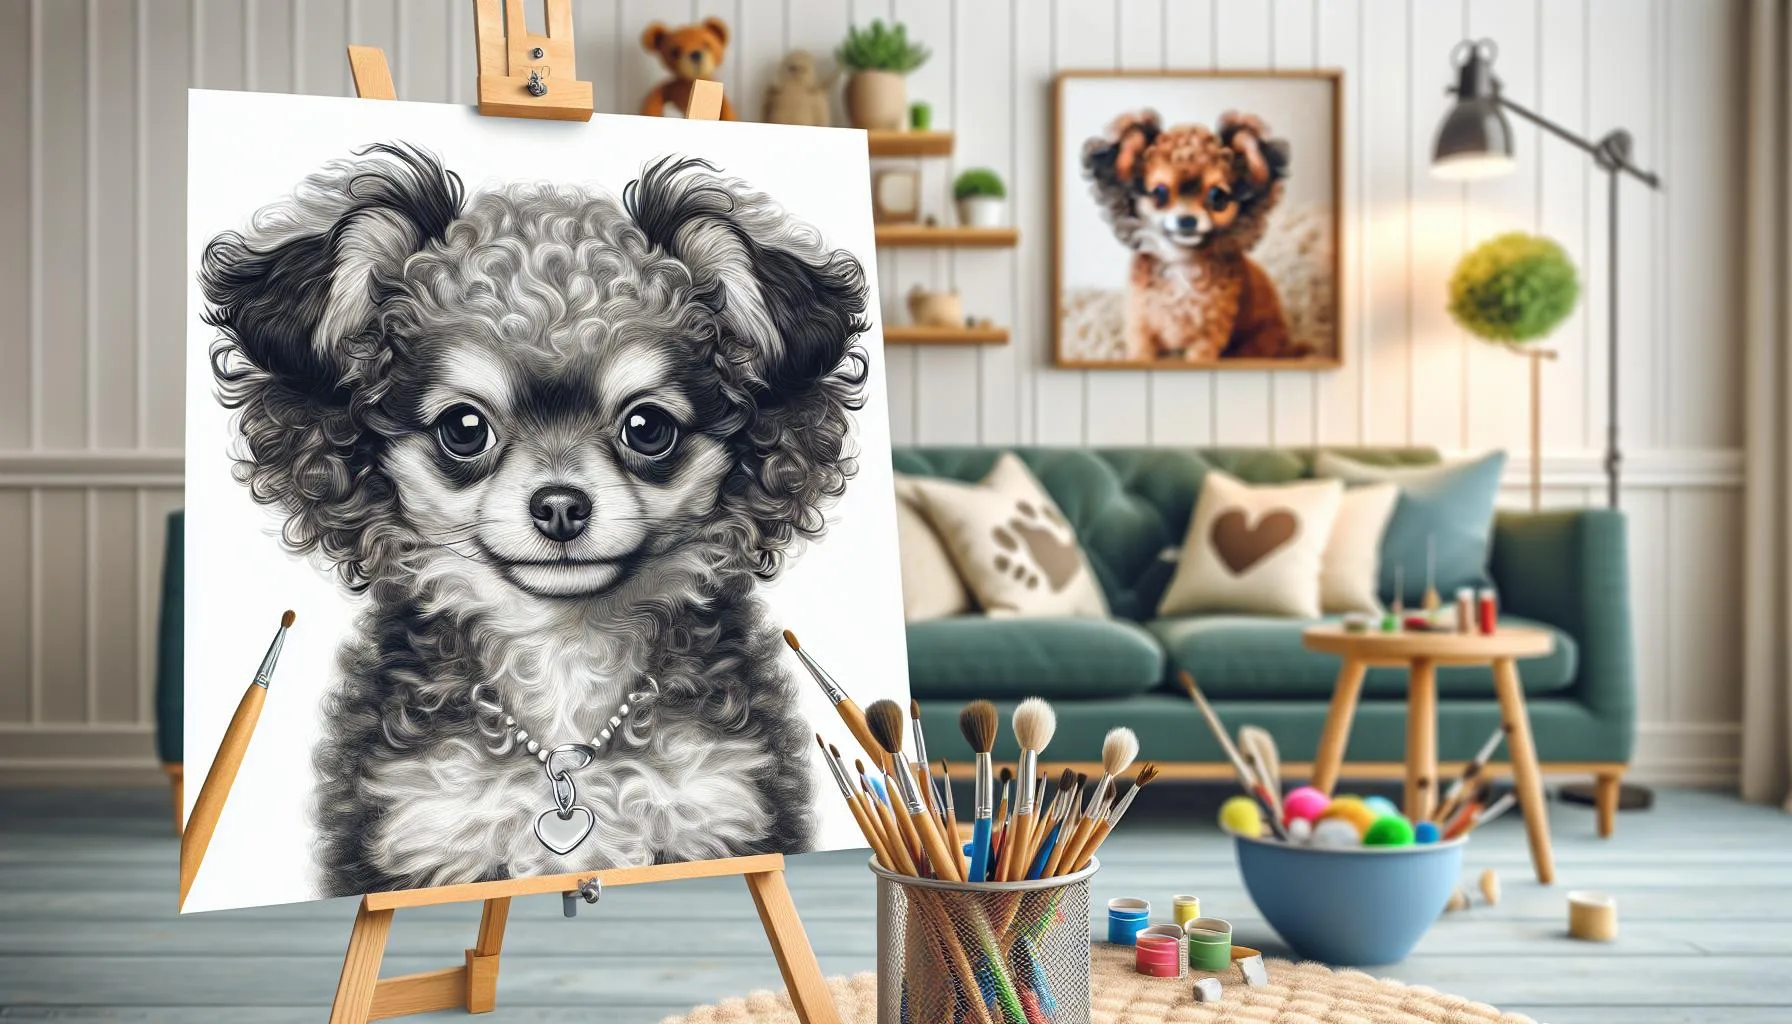  chihuahua poodle mix Physical Characteristics of the Chipoo